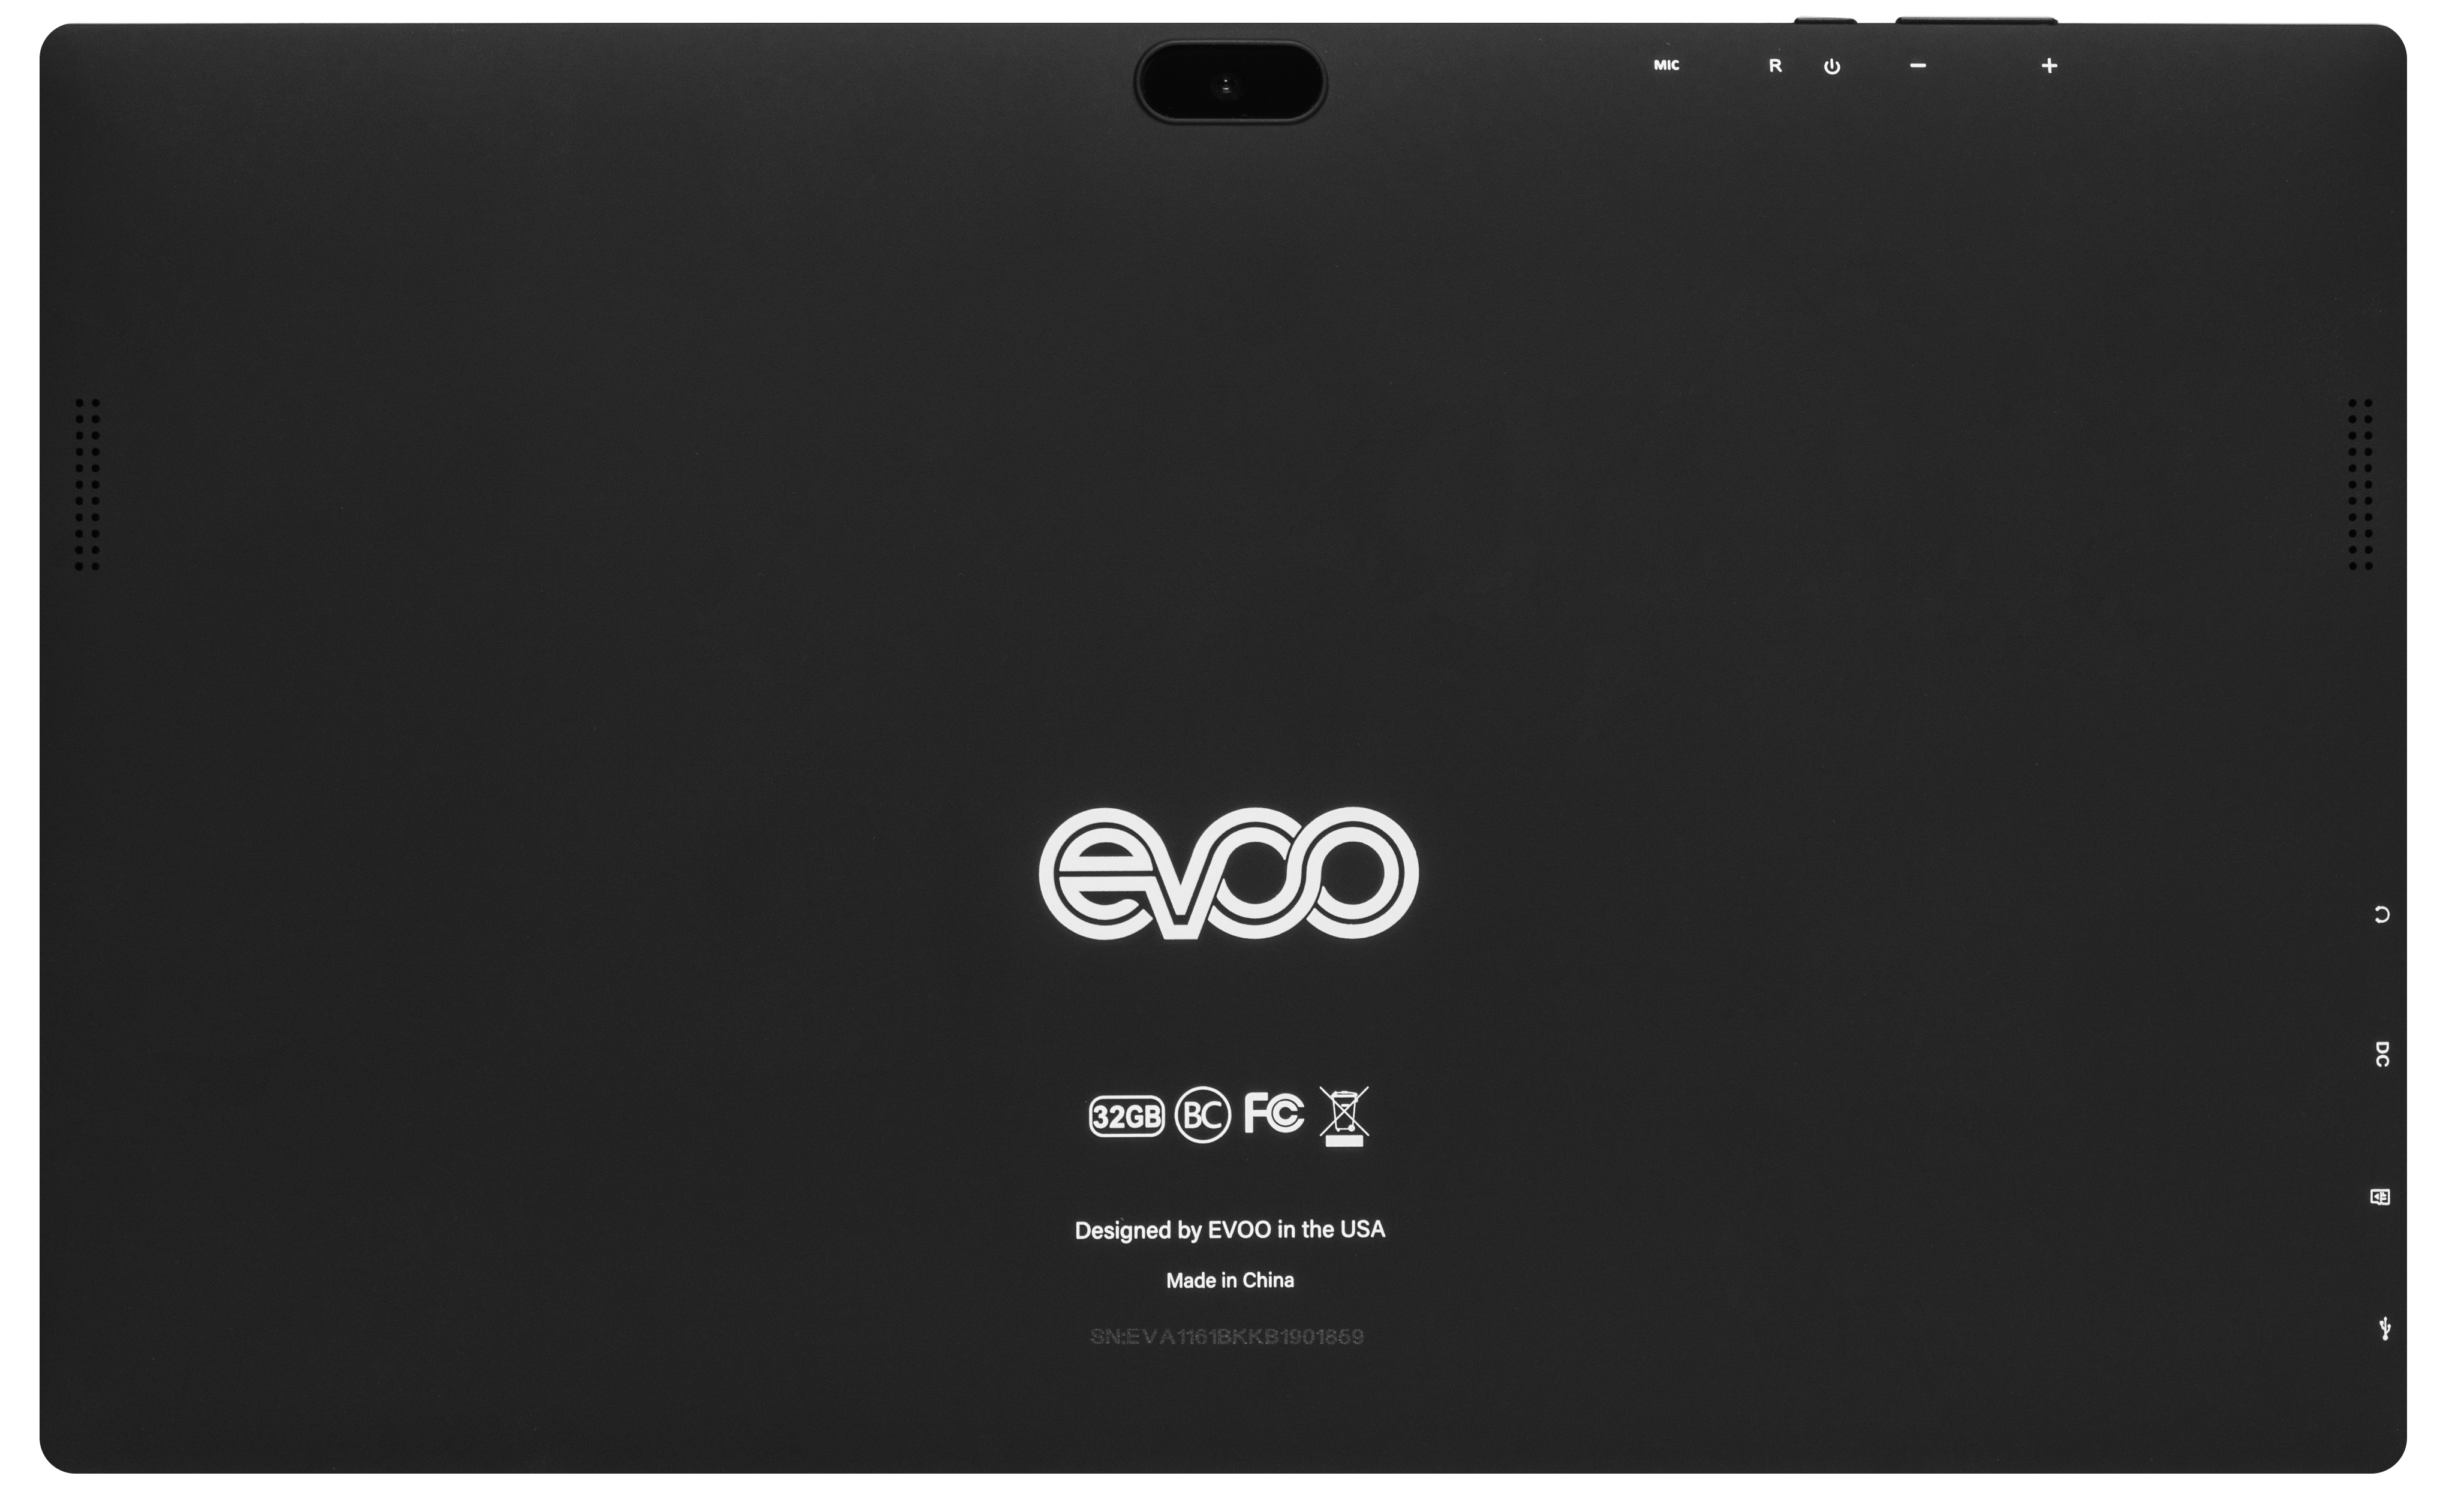 EVOO 11.5" Android Tablet, Quad Core, 32GB Storage, Micro SD Slot, Dual Cameras, Android 8.1 Go Edition, Black - image 4 of 4